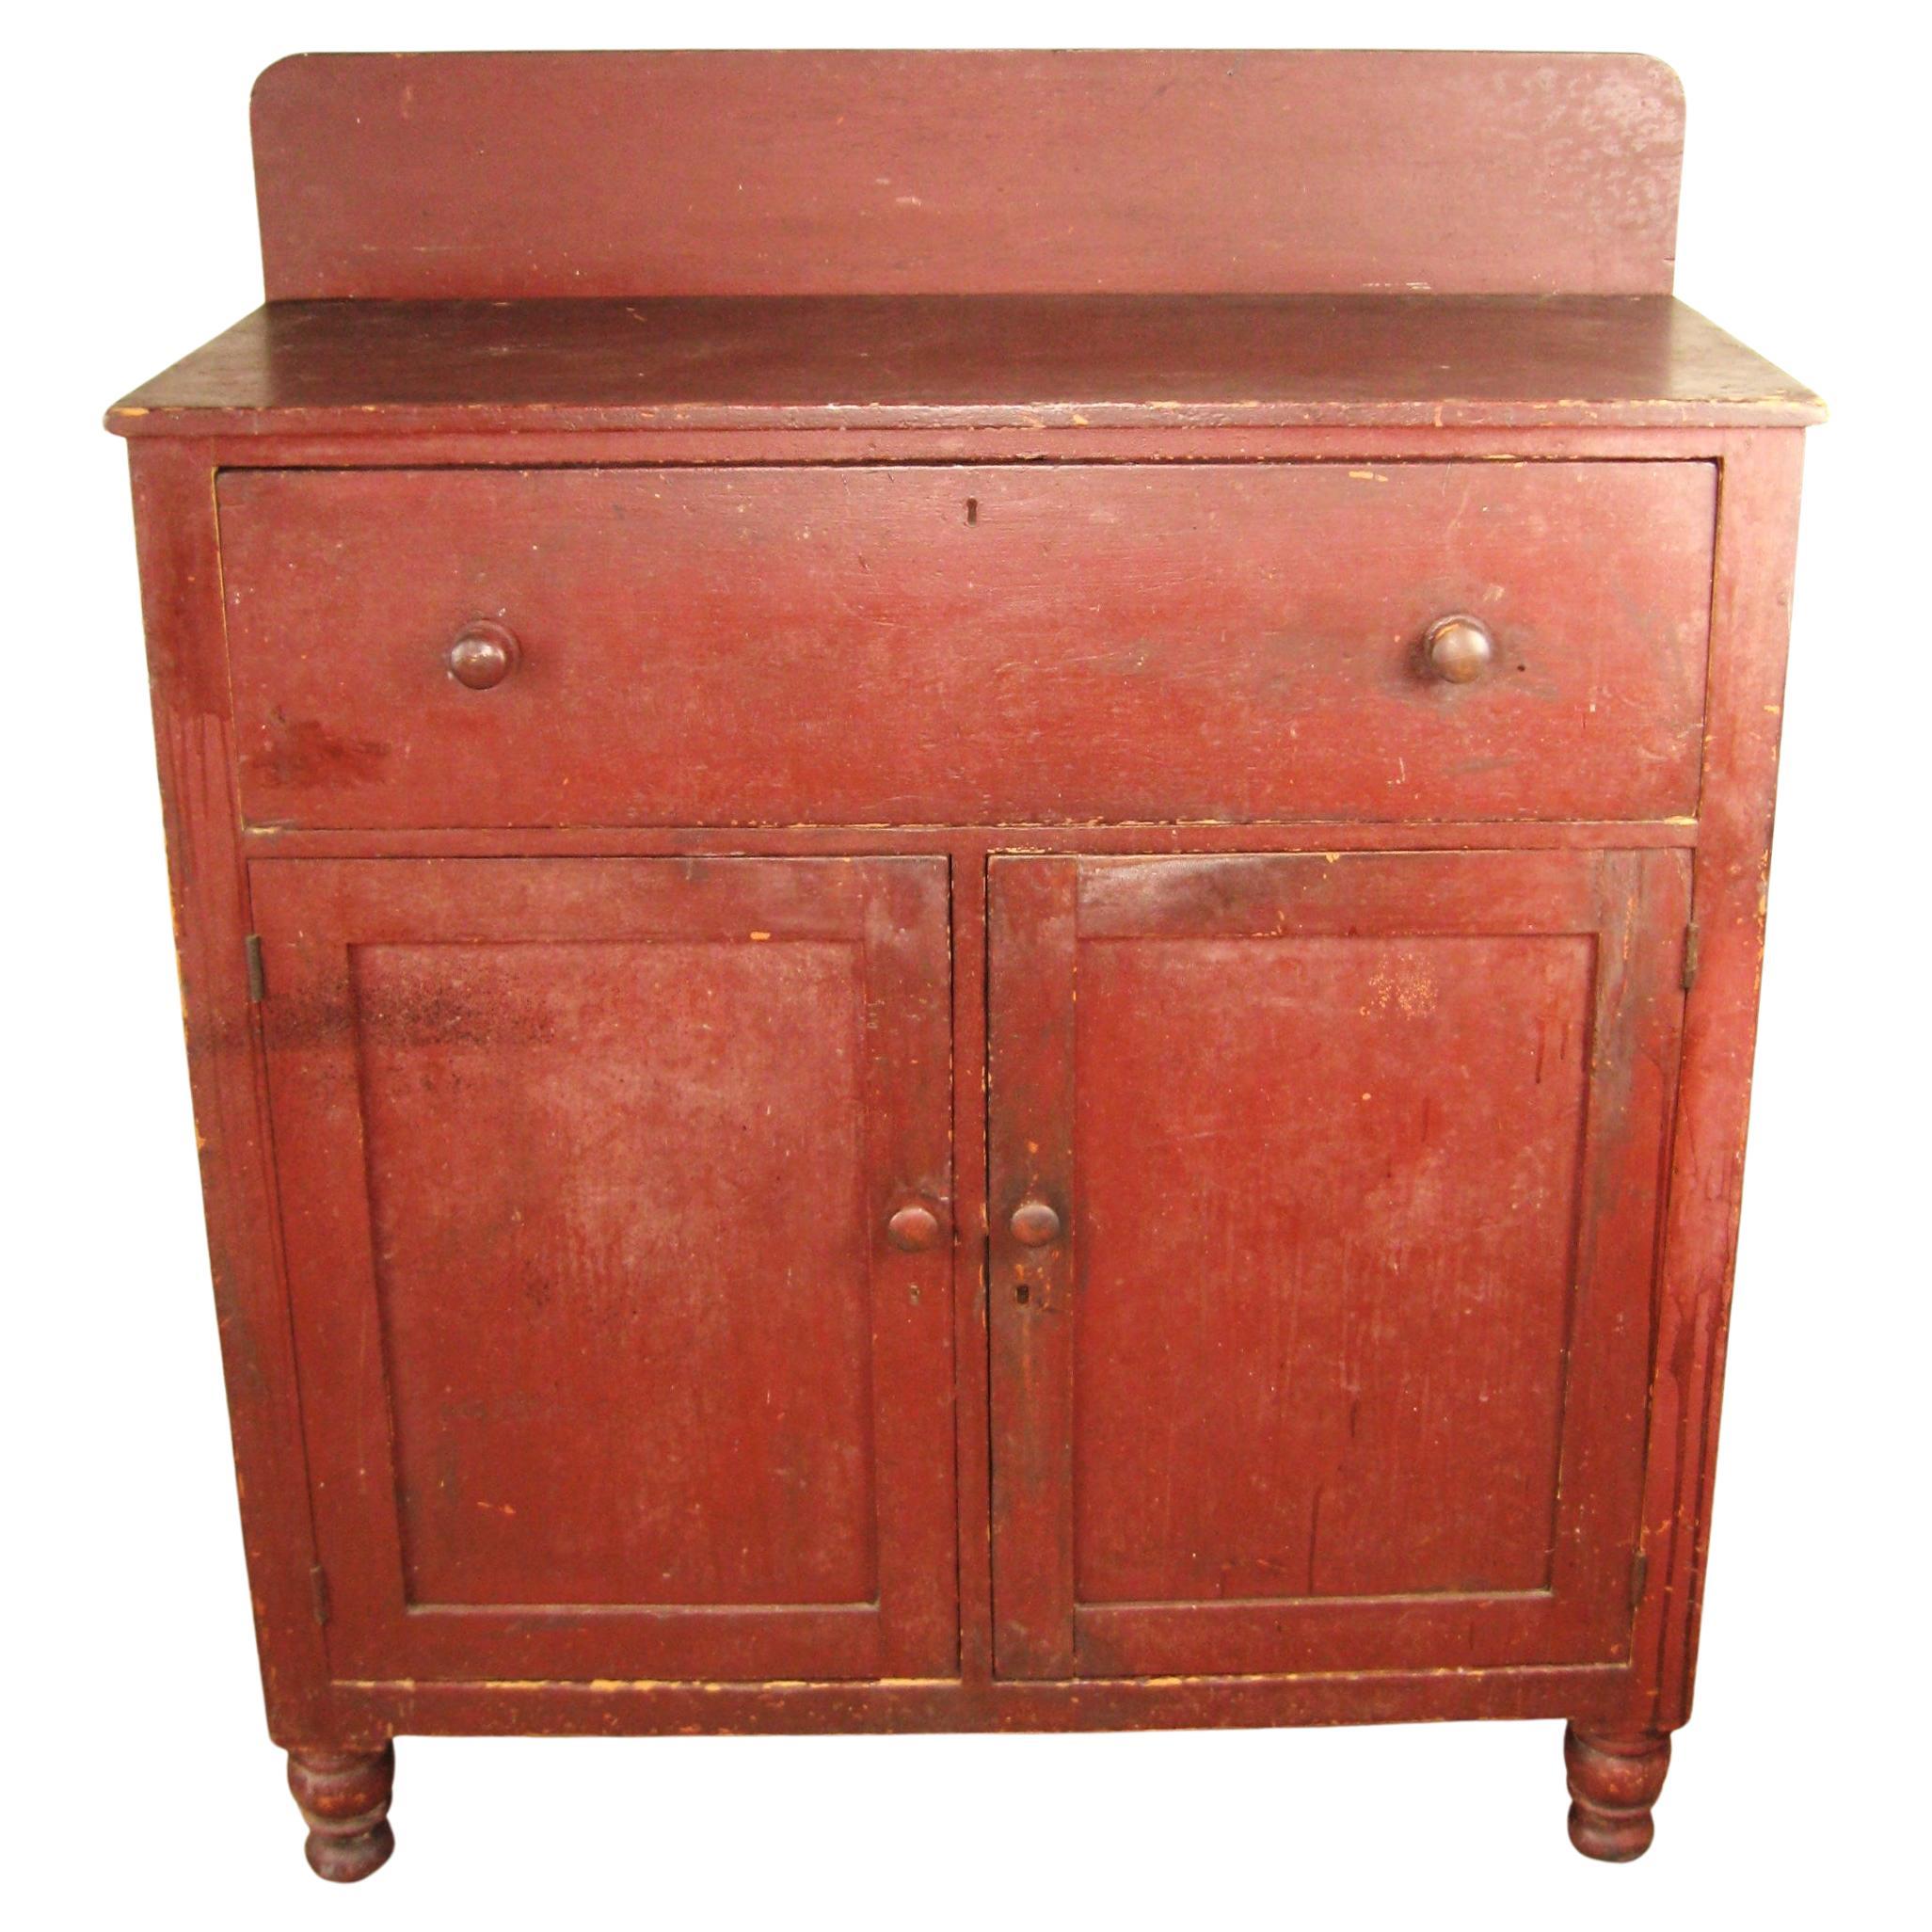 Mid 19th century Red wash/paint primitive Jelly Cupboard For Sale